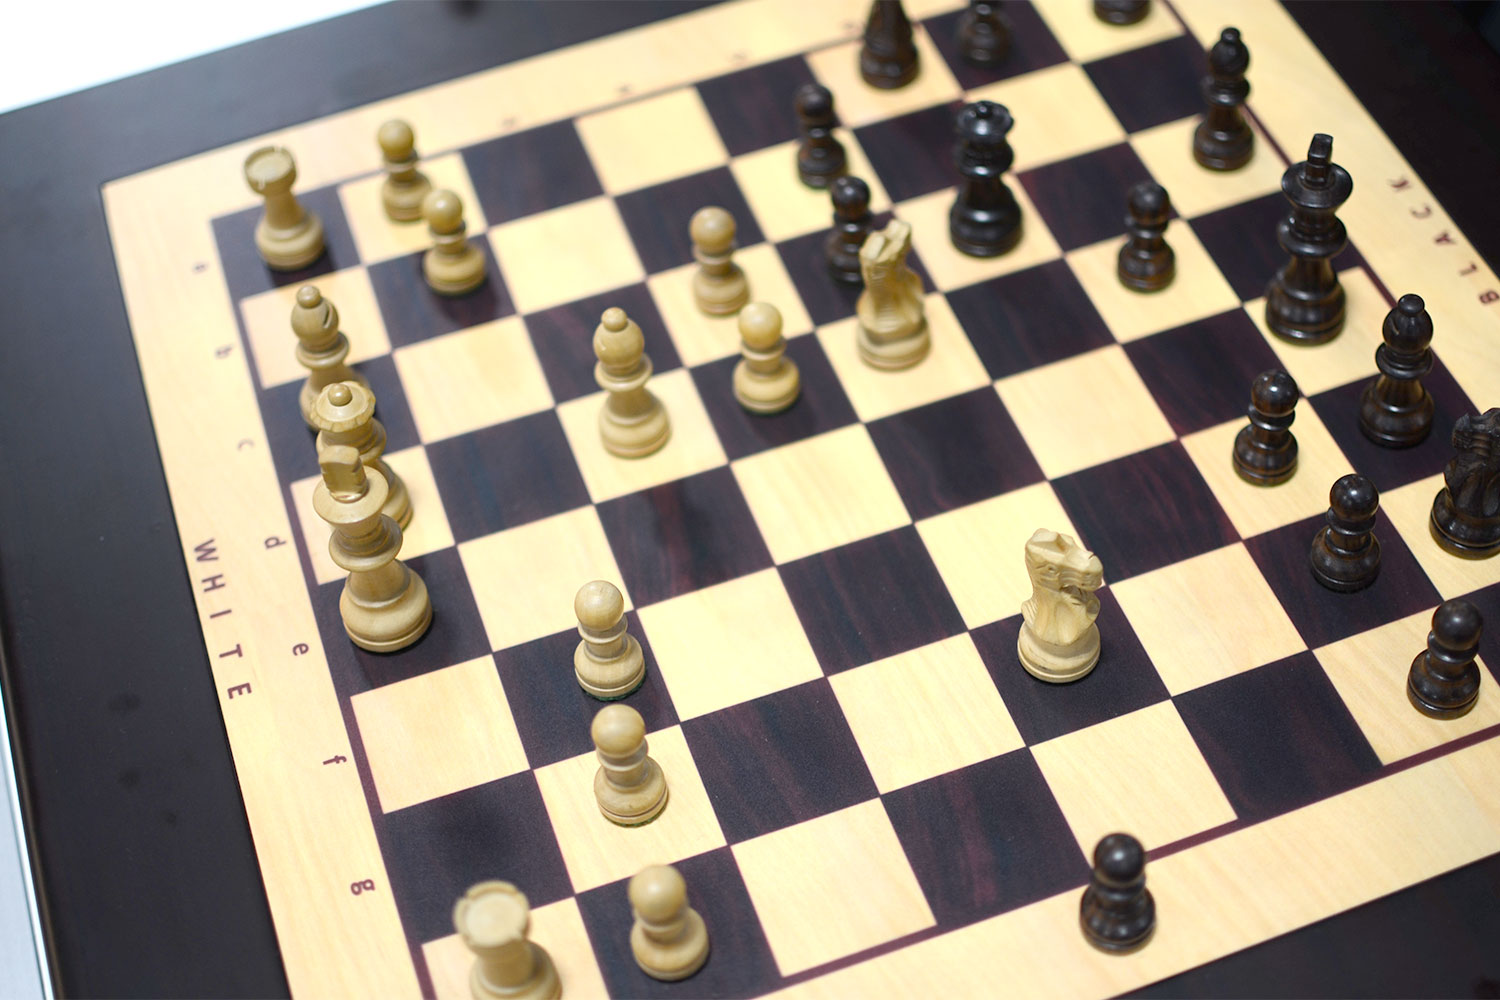 Crowdfunding Watch: NEO, the self-moving chess board